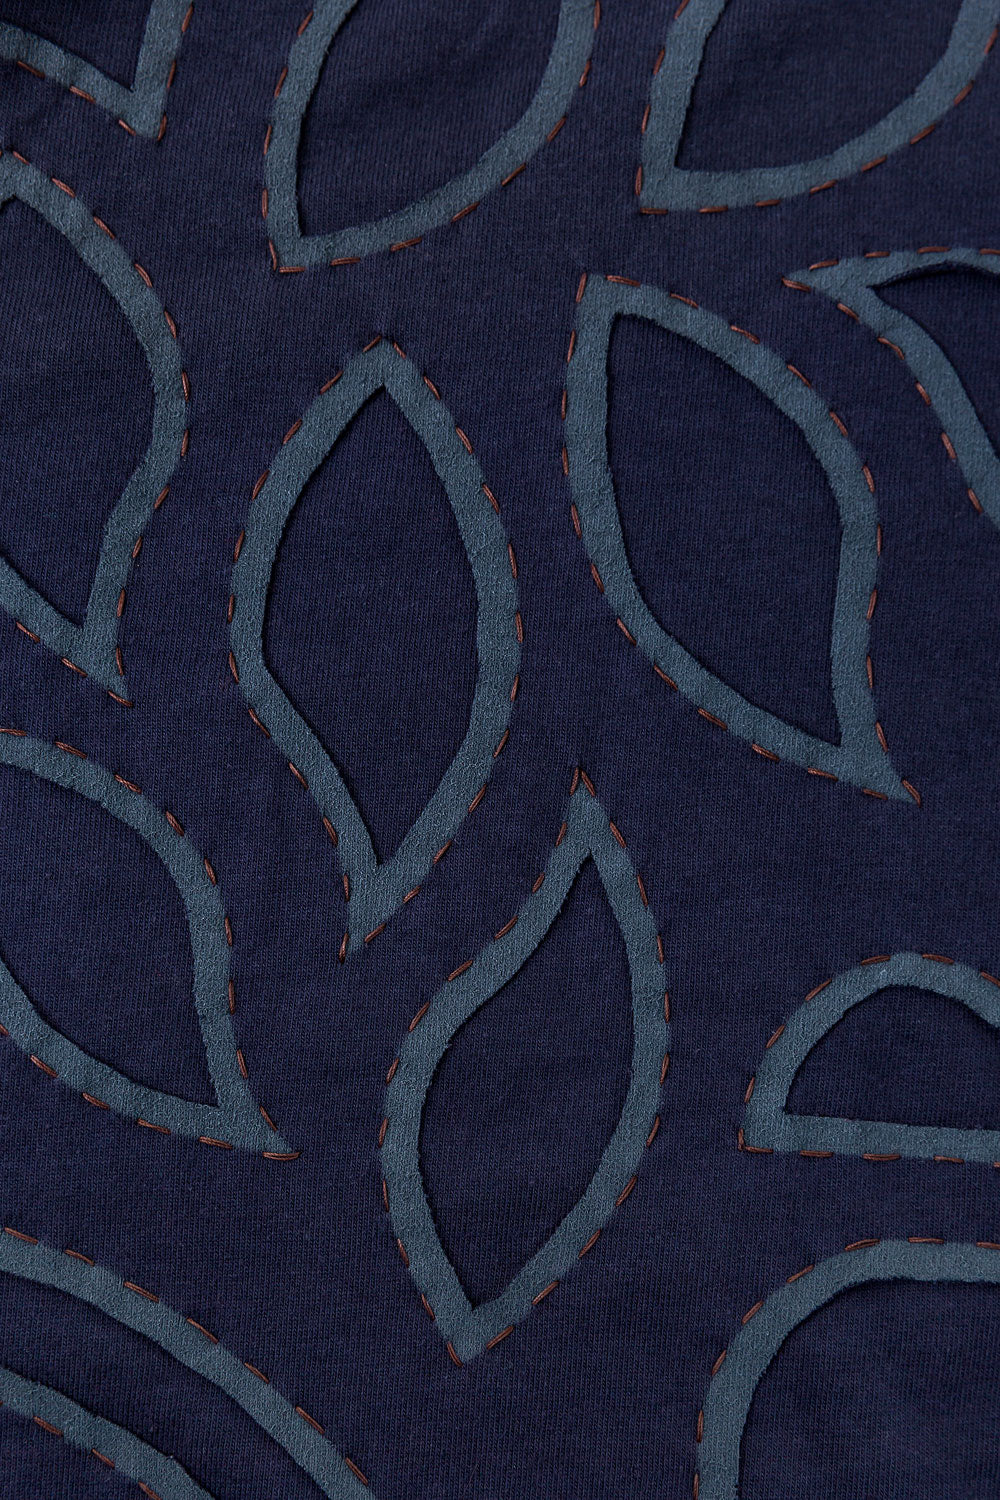 Swatch featuring the Abstract design in reverse appliqué on navy fabric.